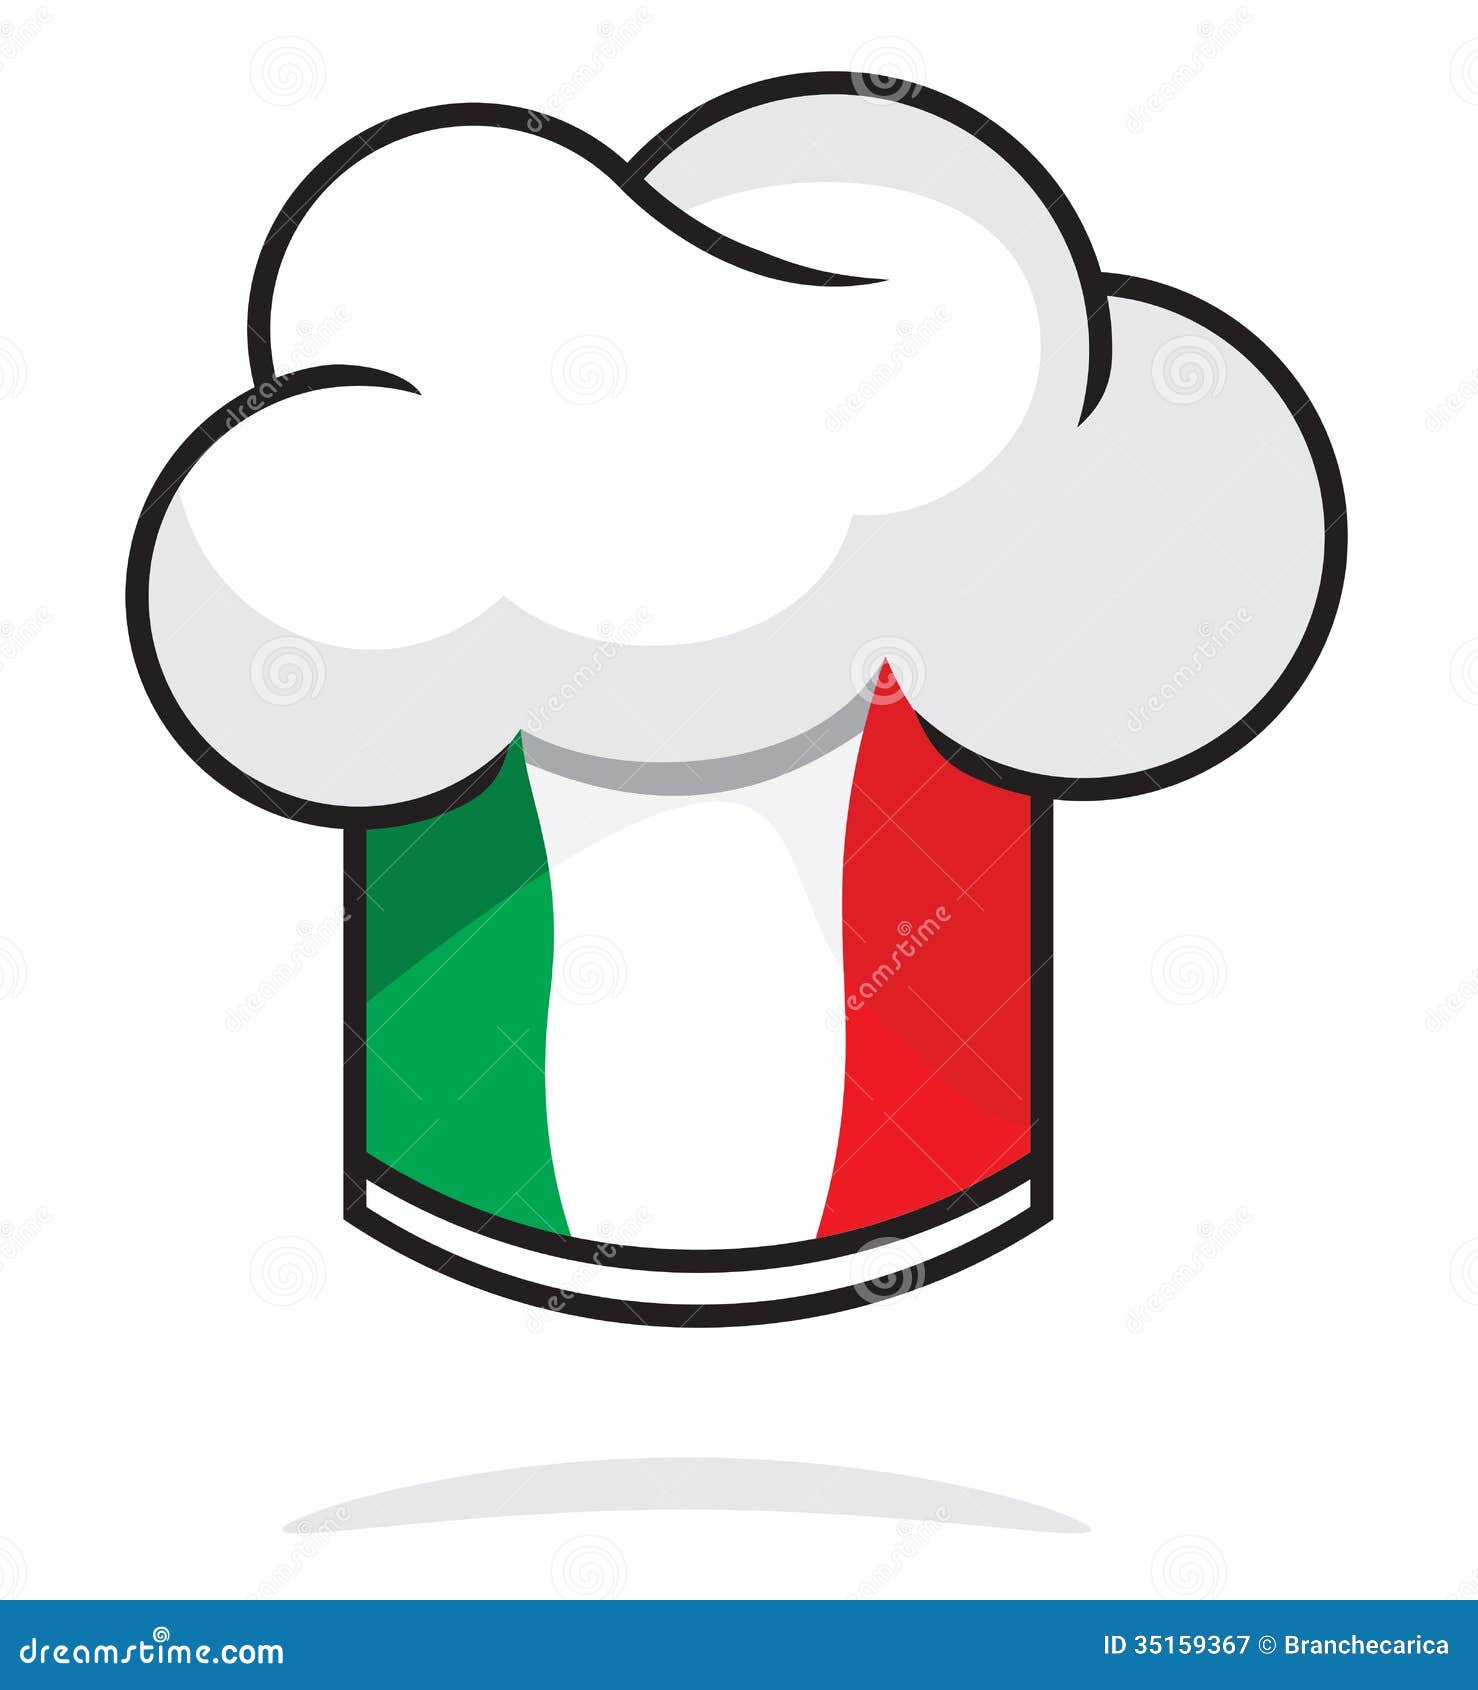 chef hat clipart vector - photo #30